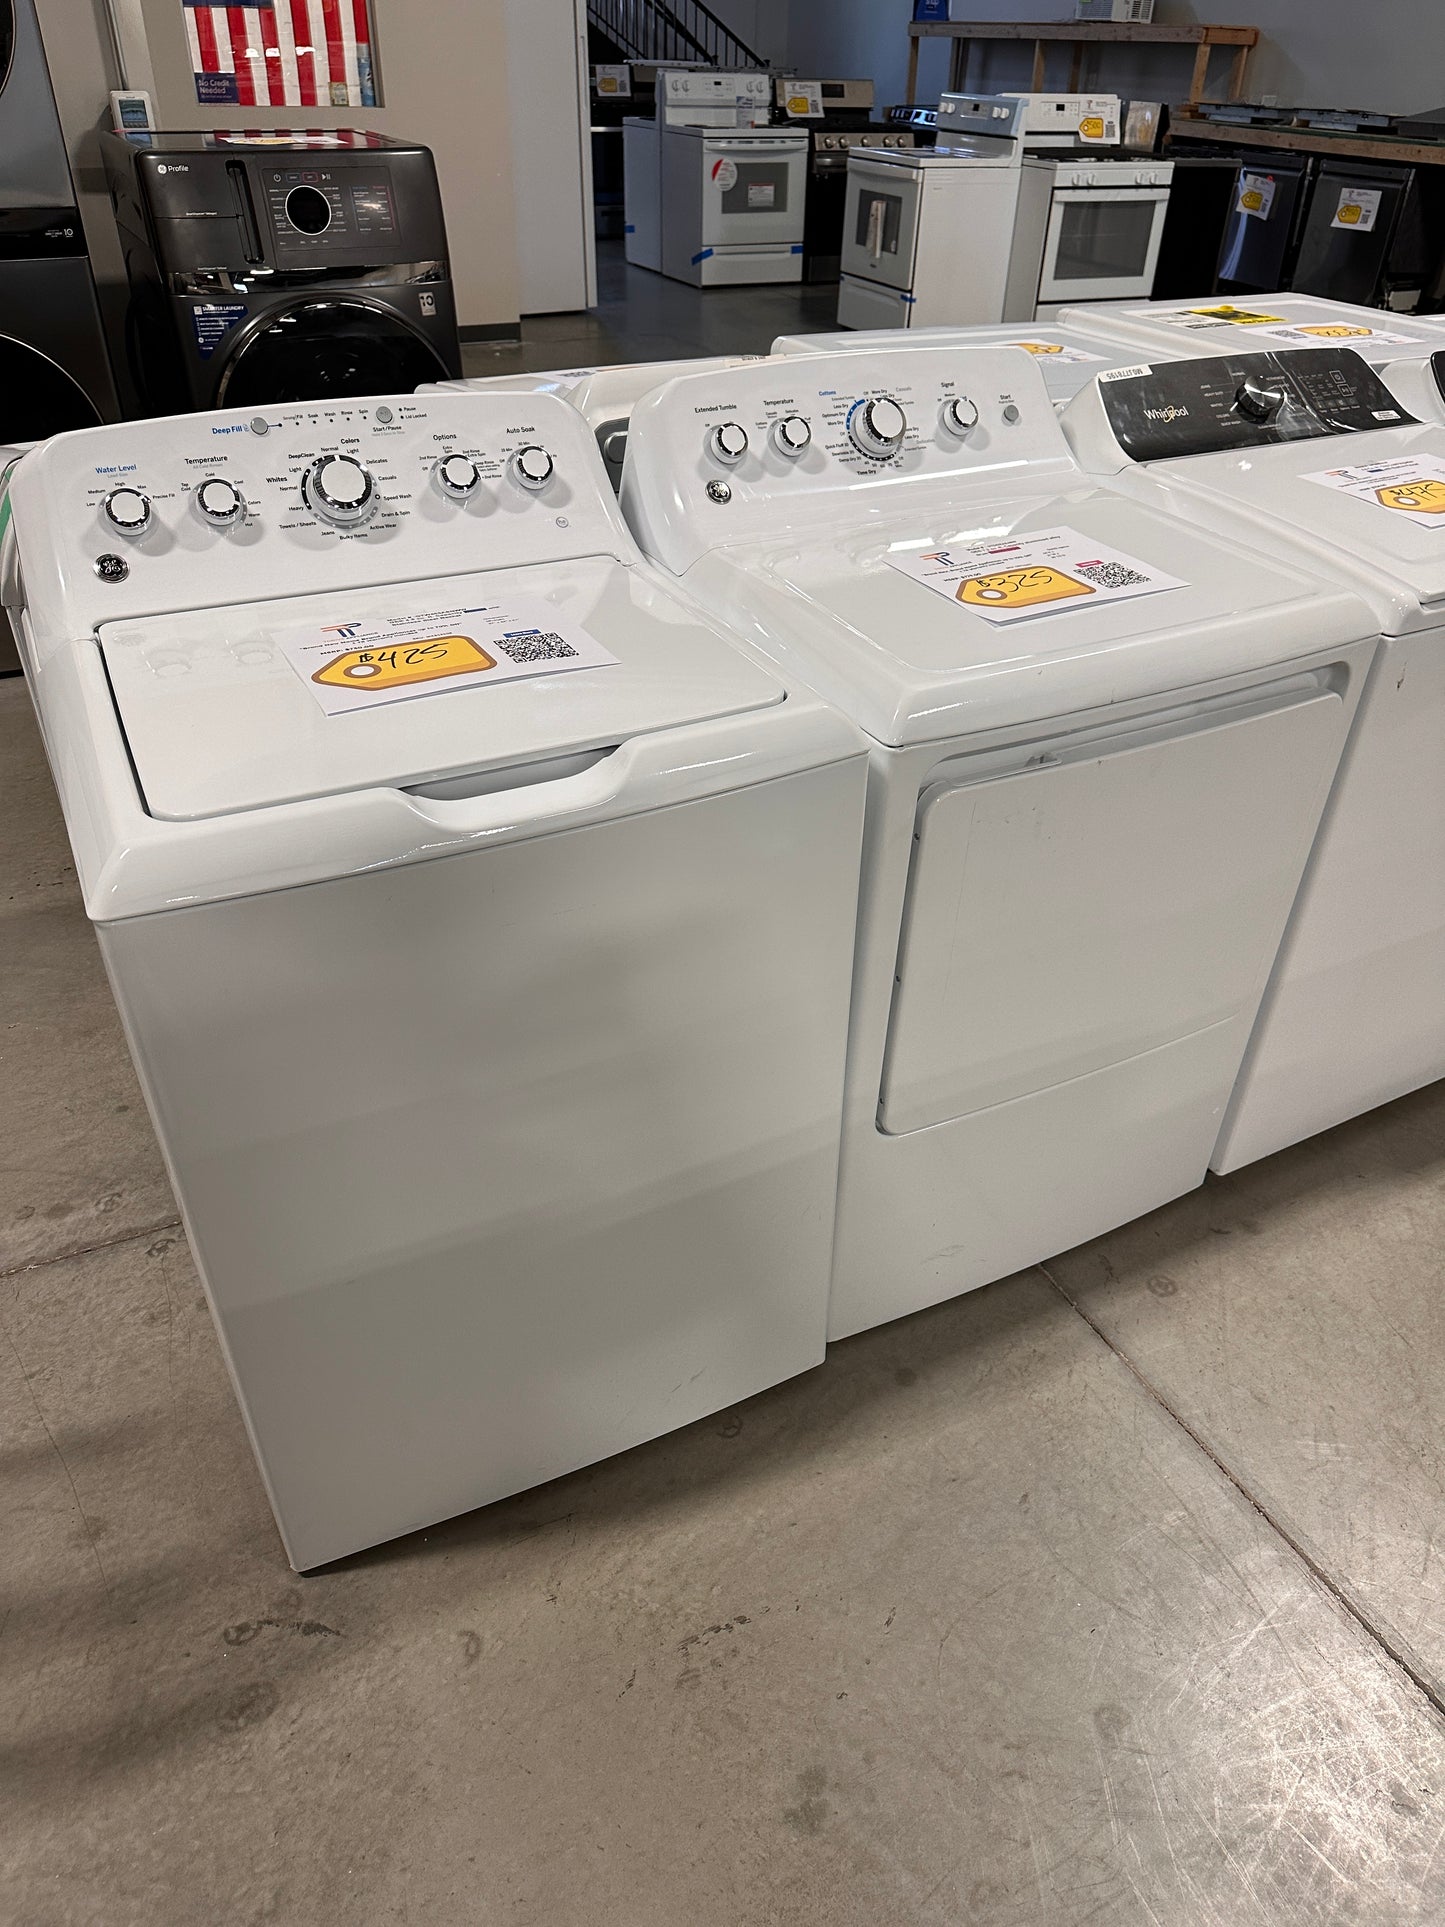 GREAT NEW GE TOP LOAD WASHER ELECTRIC DRYER LAUNDRY SET - WAS13108 DRY12407